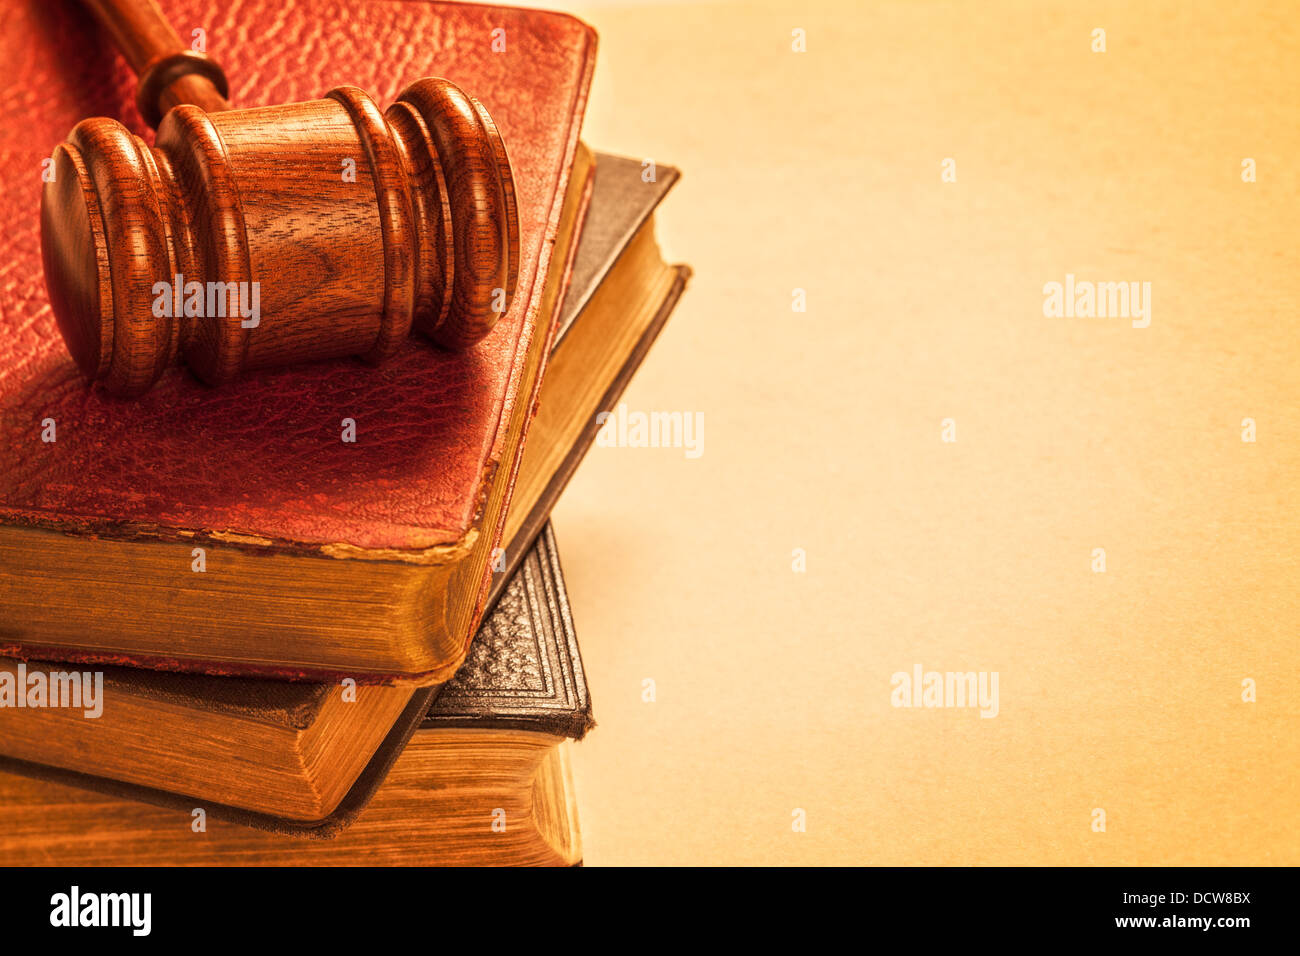 Gavel and Old Books - gavel, a pile of books, and space for text on textured background. Stock Photo